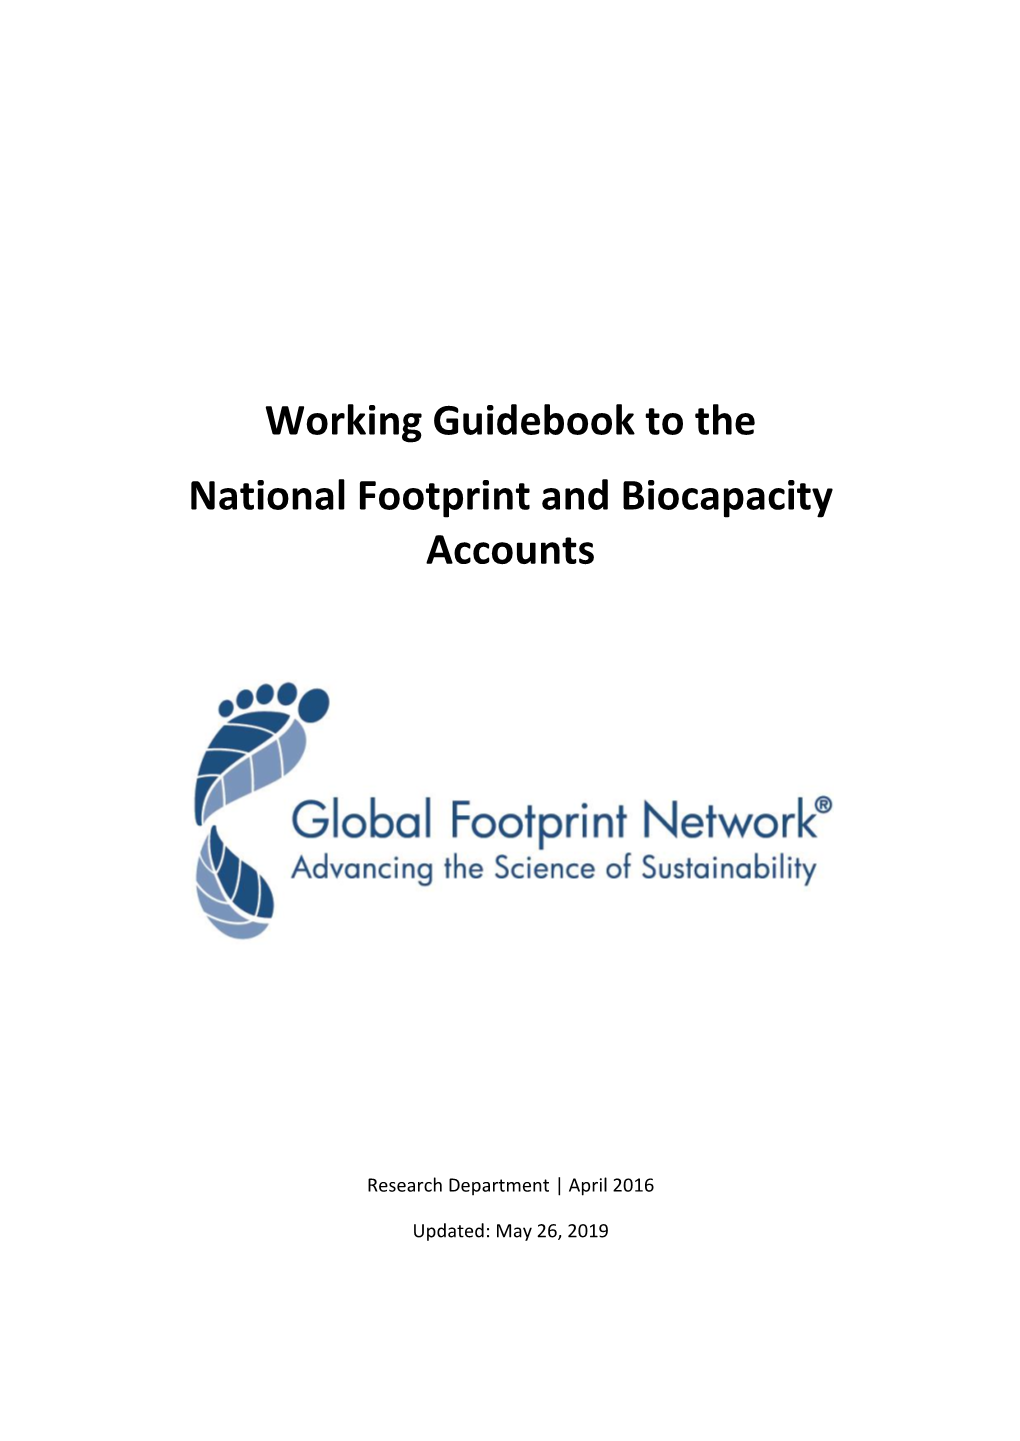 Guidebook to the National Footprint and Biocapacity Accounts 2019